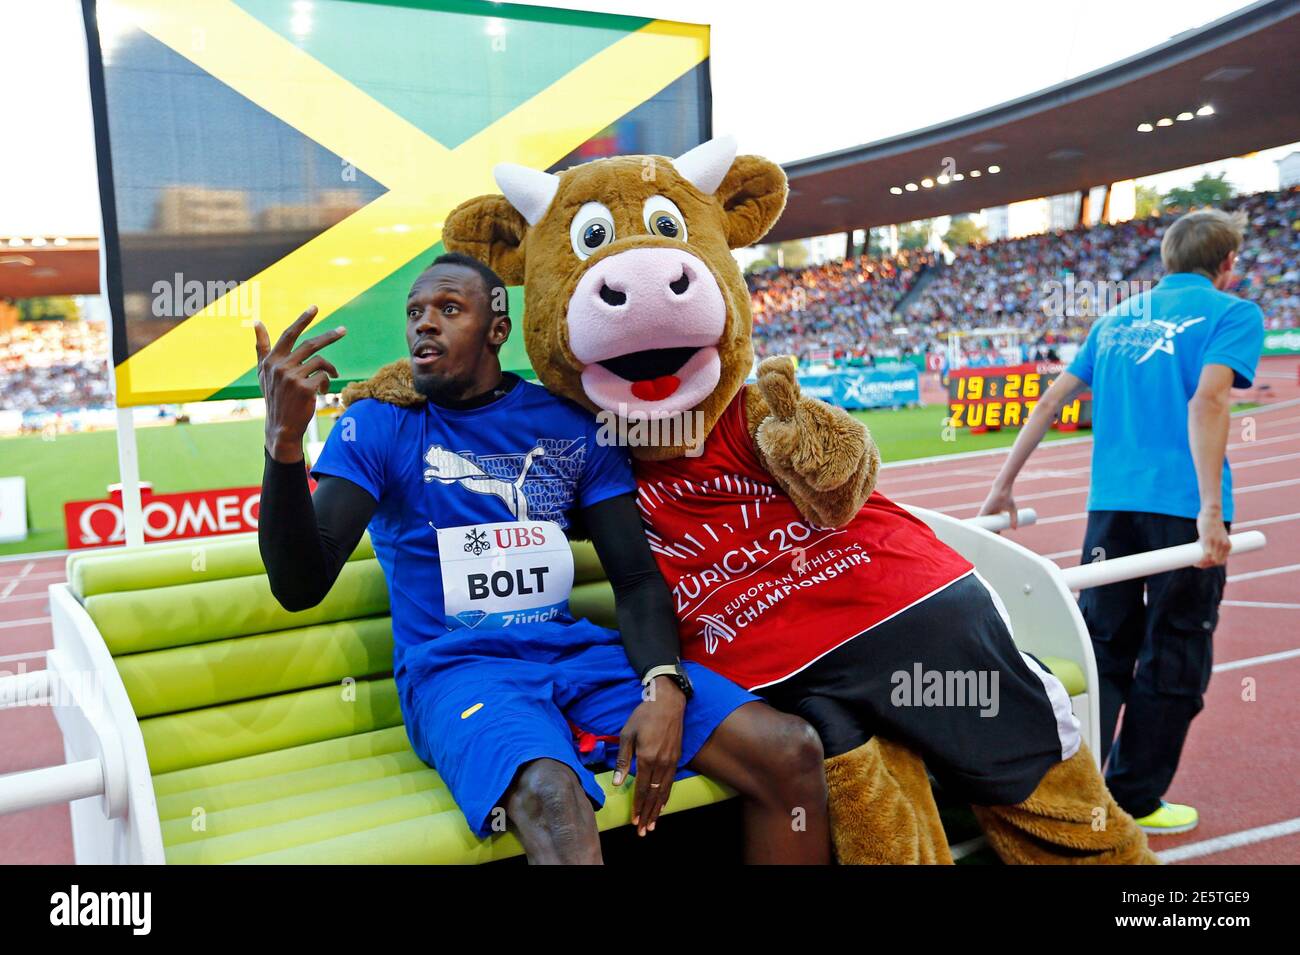 Usain Bolt of Jamaica gestures next to Cooly, the 2014 European Athletics  Championships mascot during the